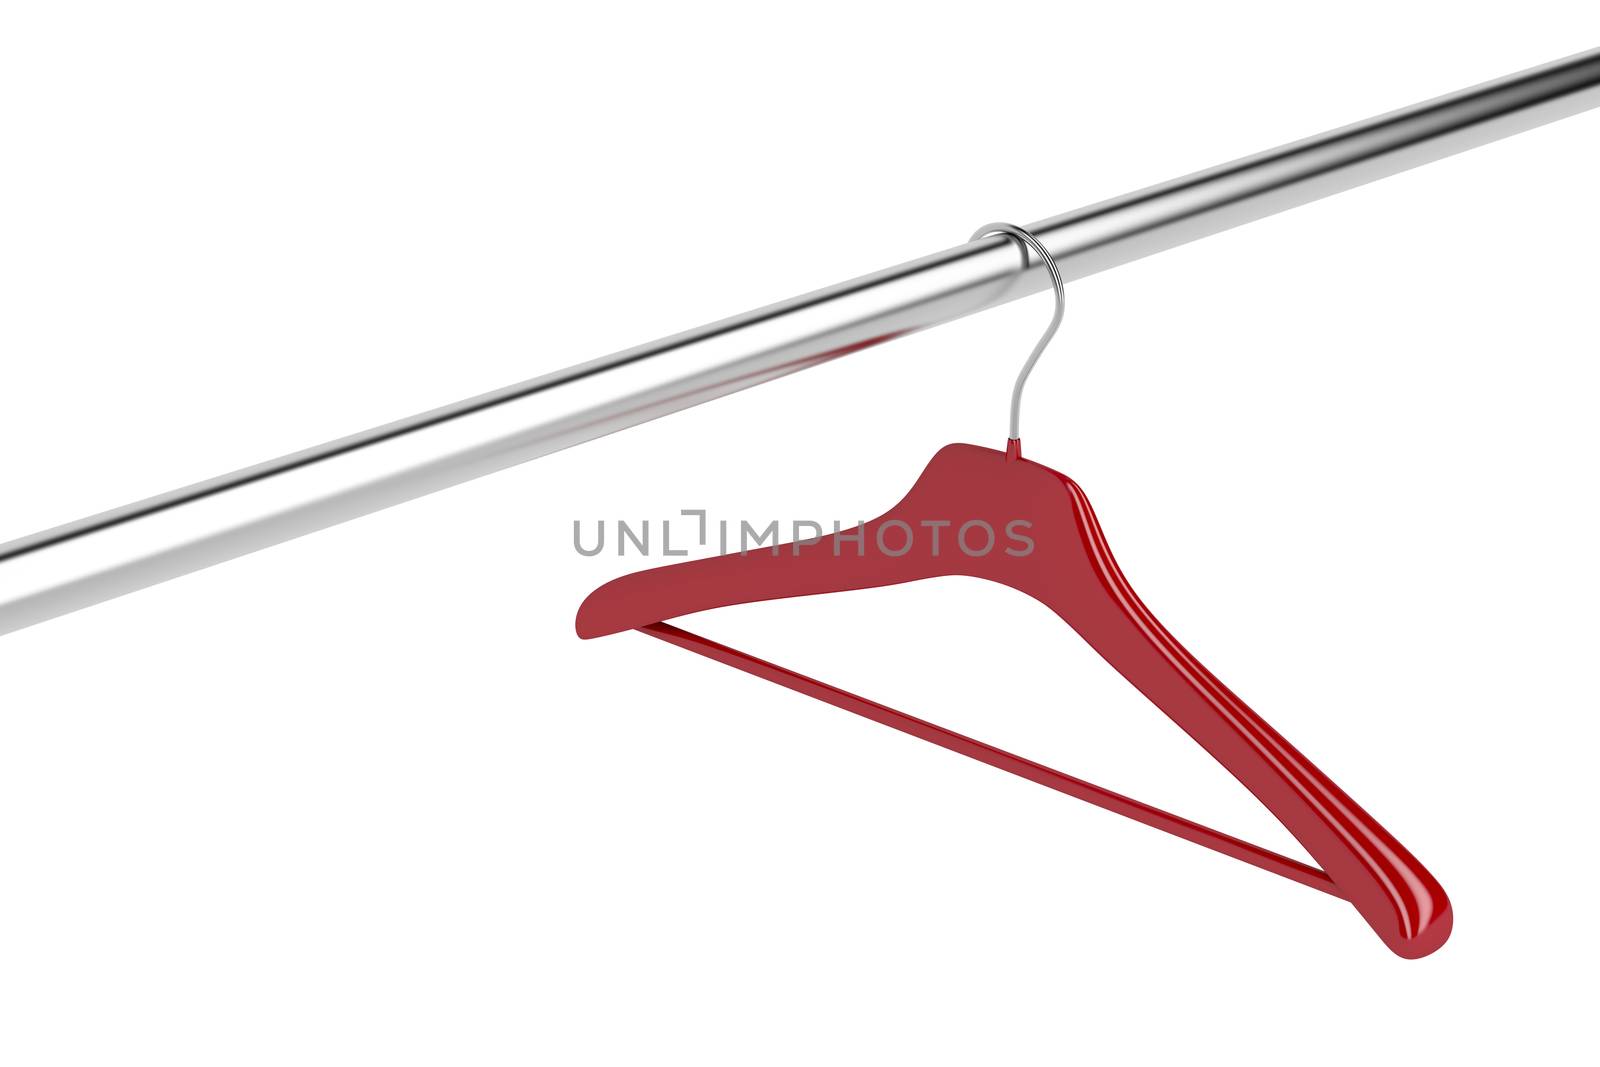 Red clothes hanger isolated on white